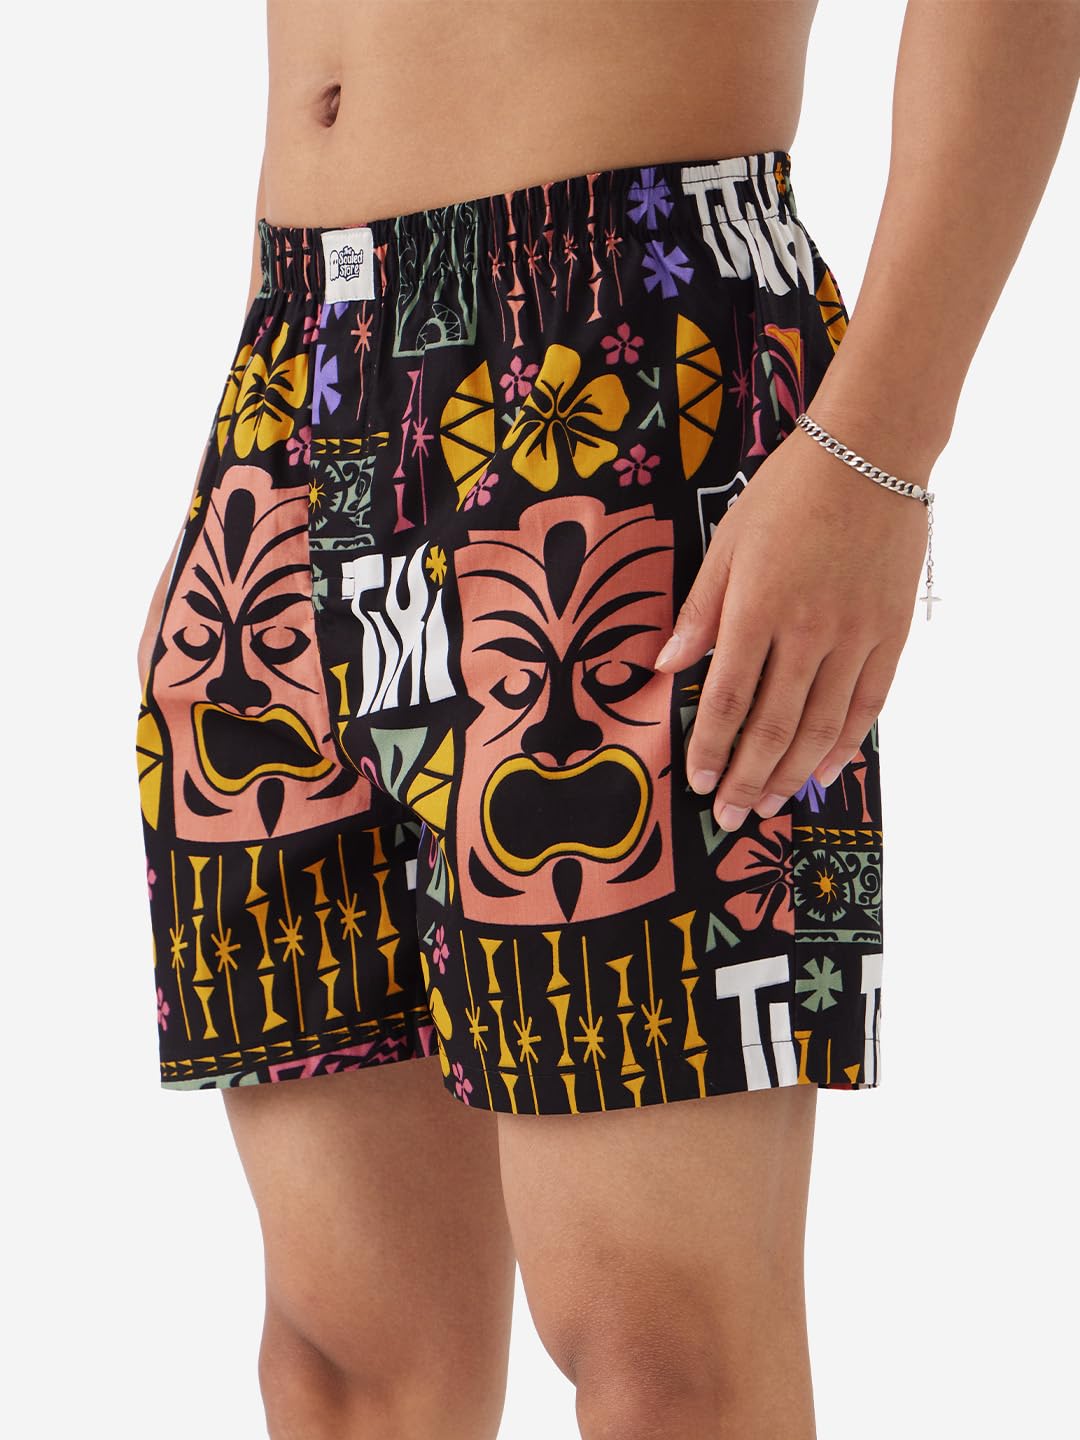 The Souled Store Tiki-Taka Men and Boys Elasticated Black All Over Printed Cotton Boxer Shorts